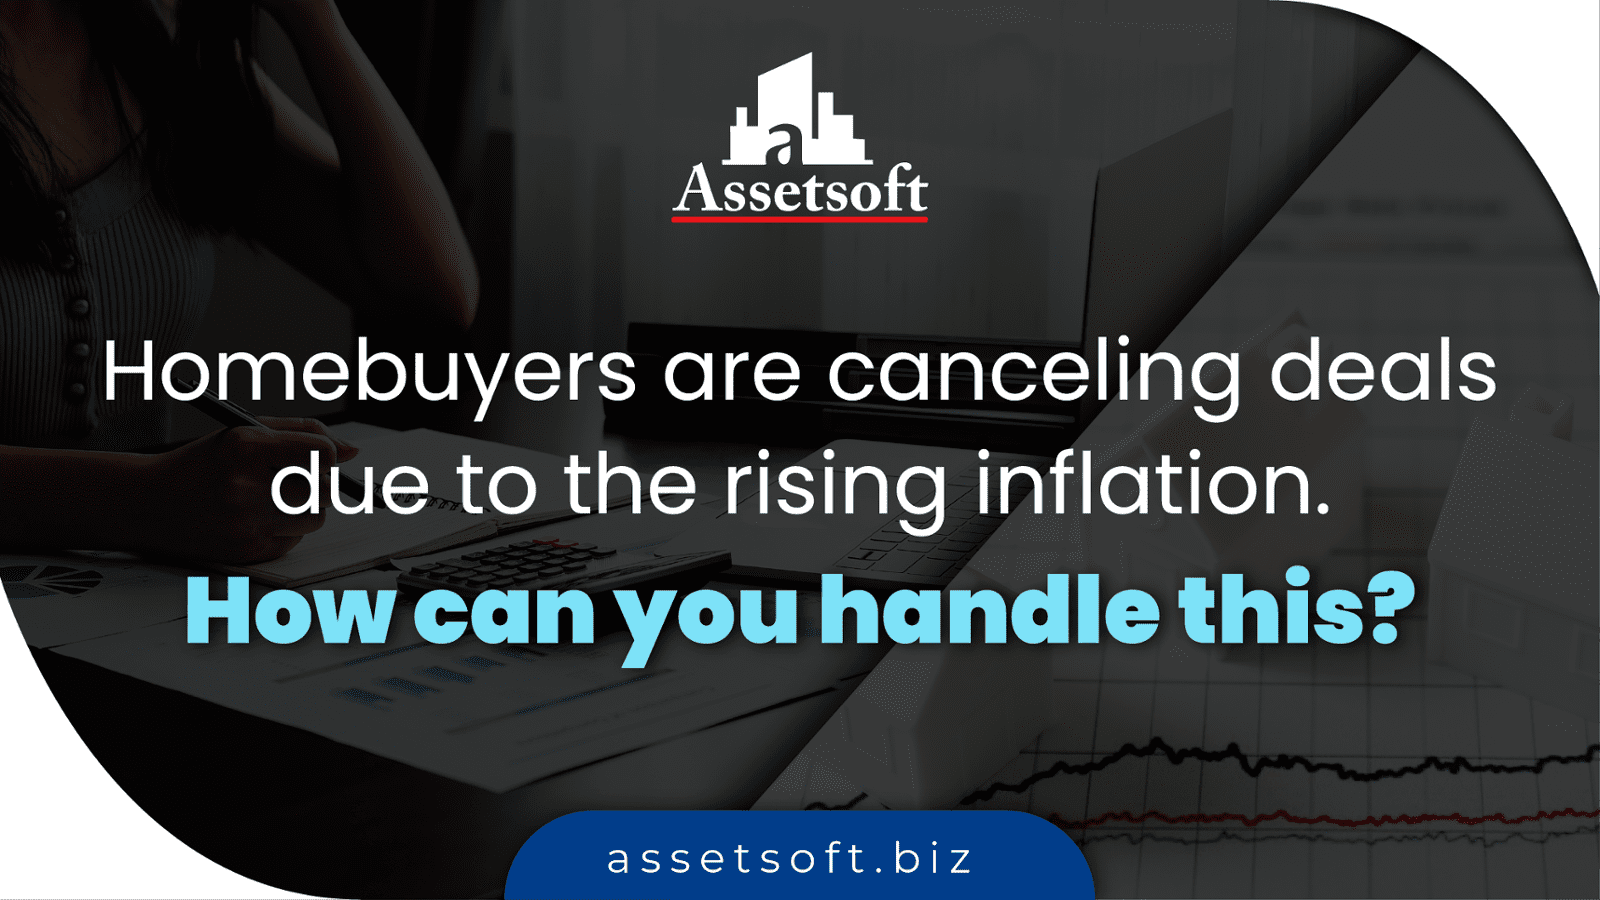 Homebuyers are canceling deals due to the rising inflation. How can you handle this? 